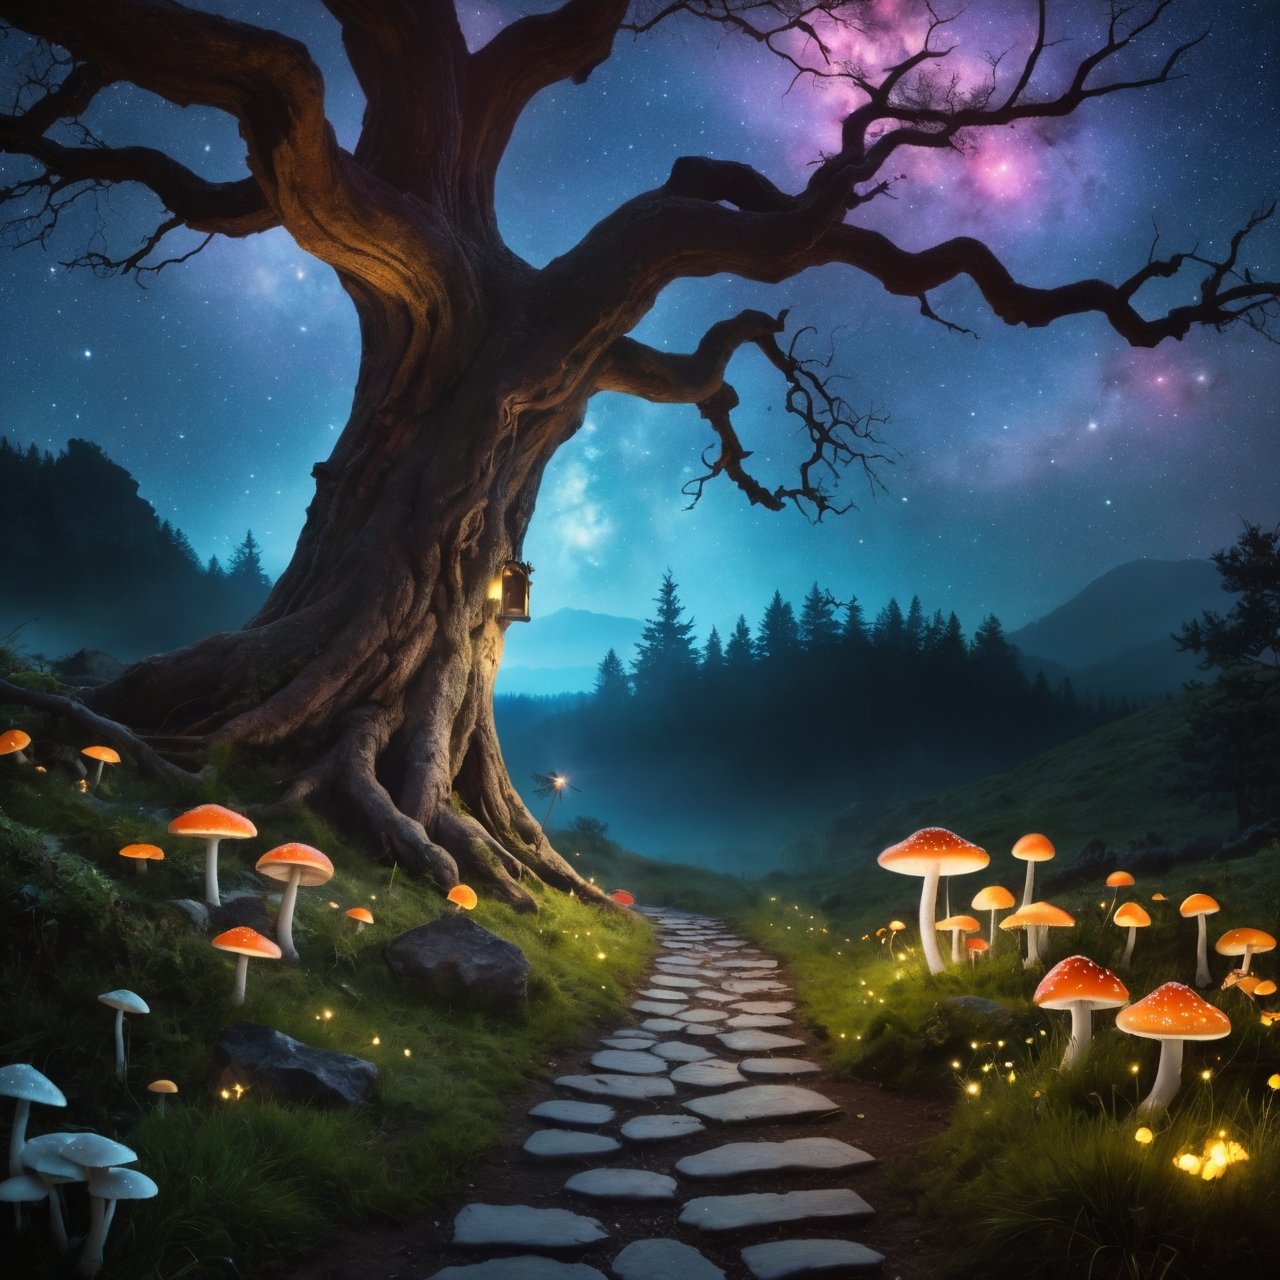 (Hasselblad Award Winner, (photorealistic)), nightime, a montainous landscape, eerie mist, faery tales, mystical tree of life in center, luminescent faerie mushroom ring, nebula, starry sky, harmonious, sublime, serenity, luminescent fireflies swirling around tree, rustic path leading to a magical glowing door inside tree, 